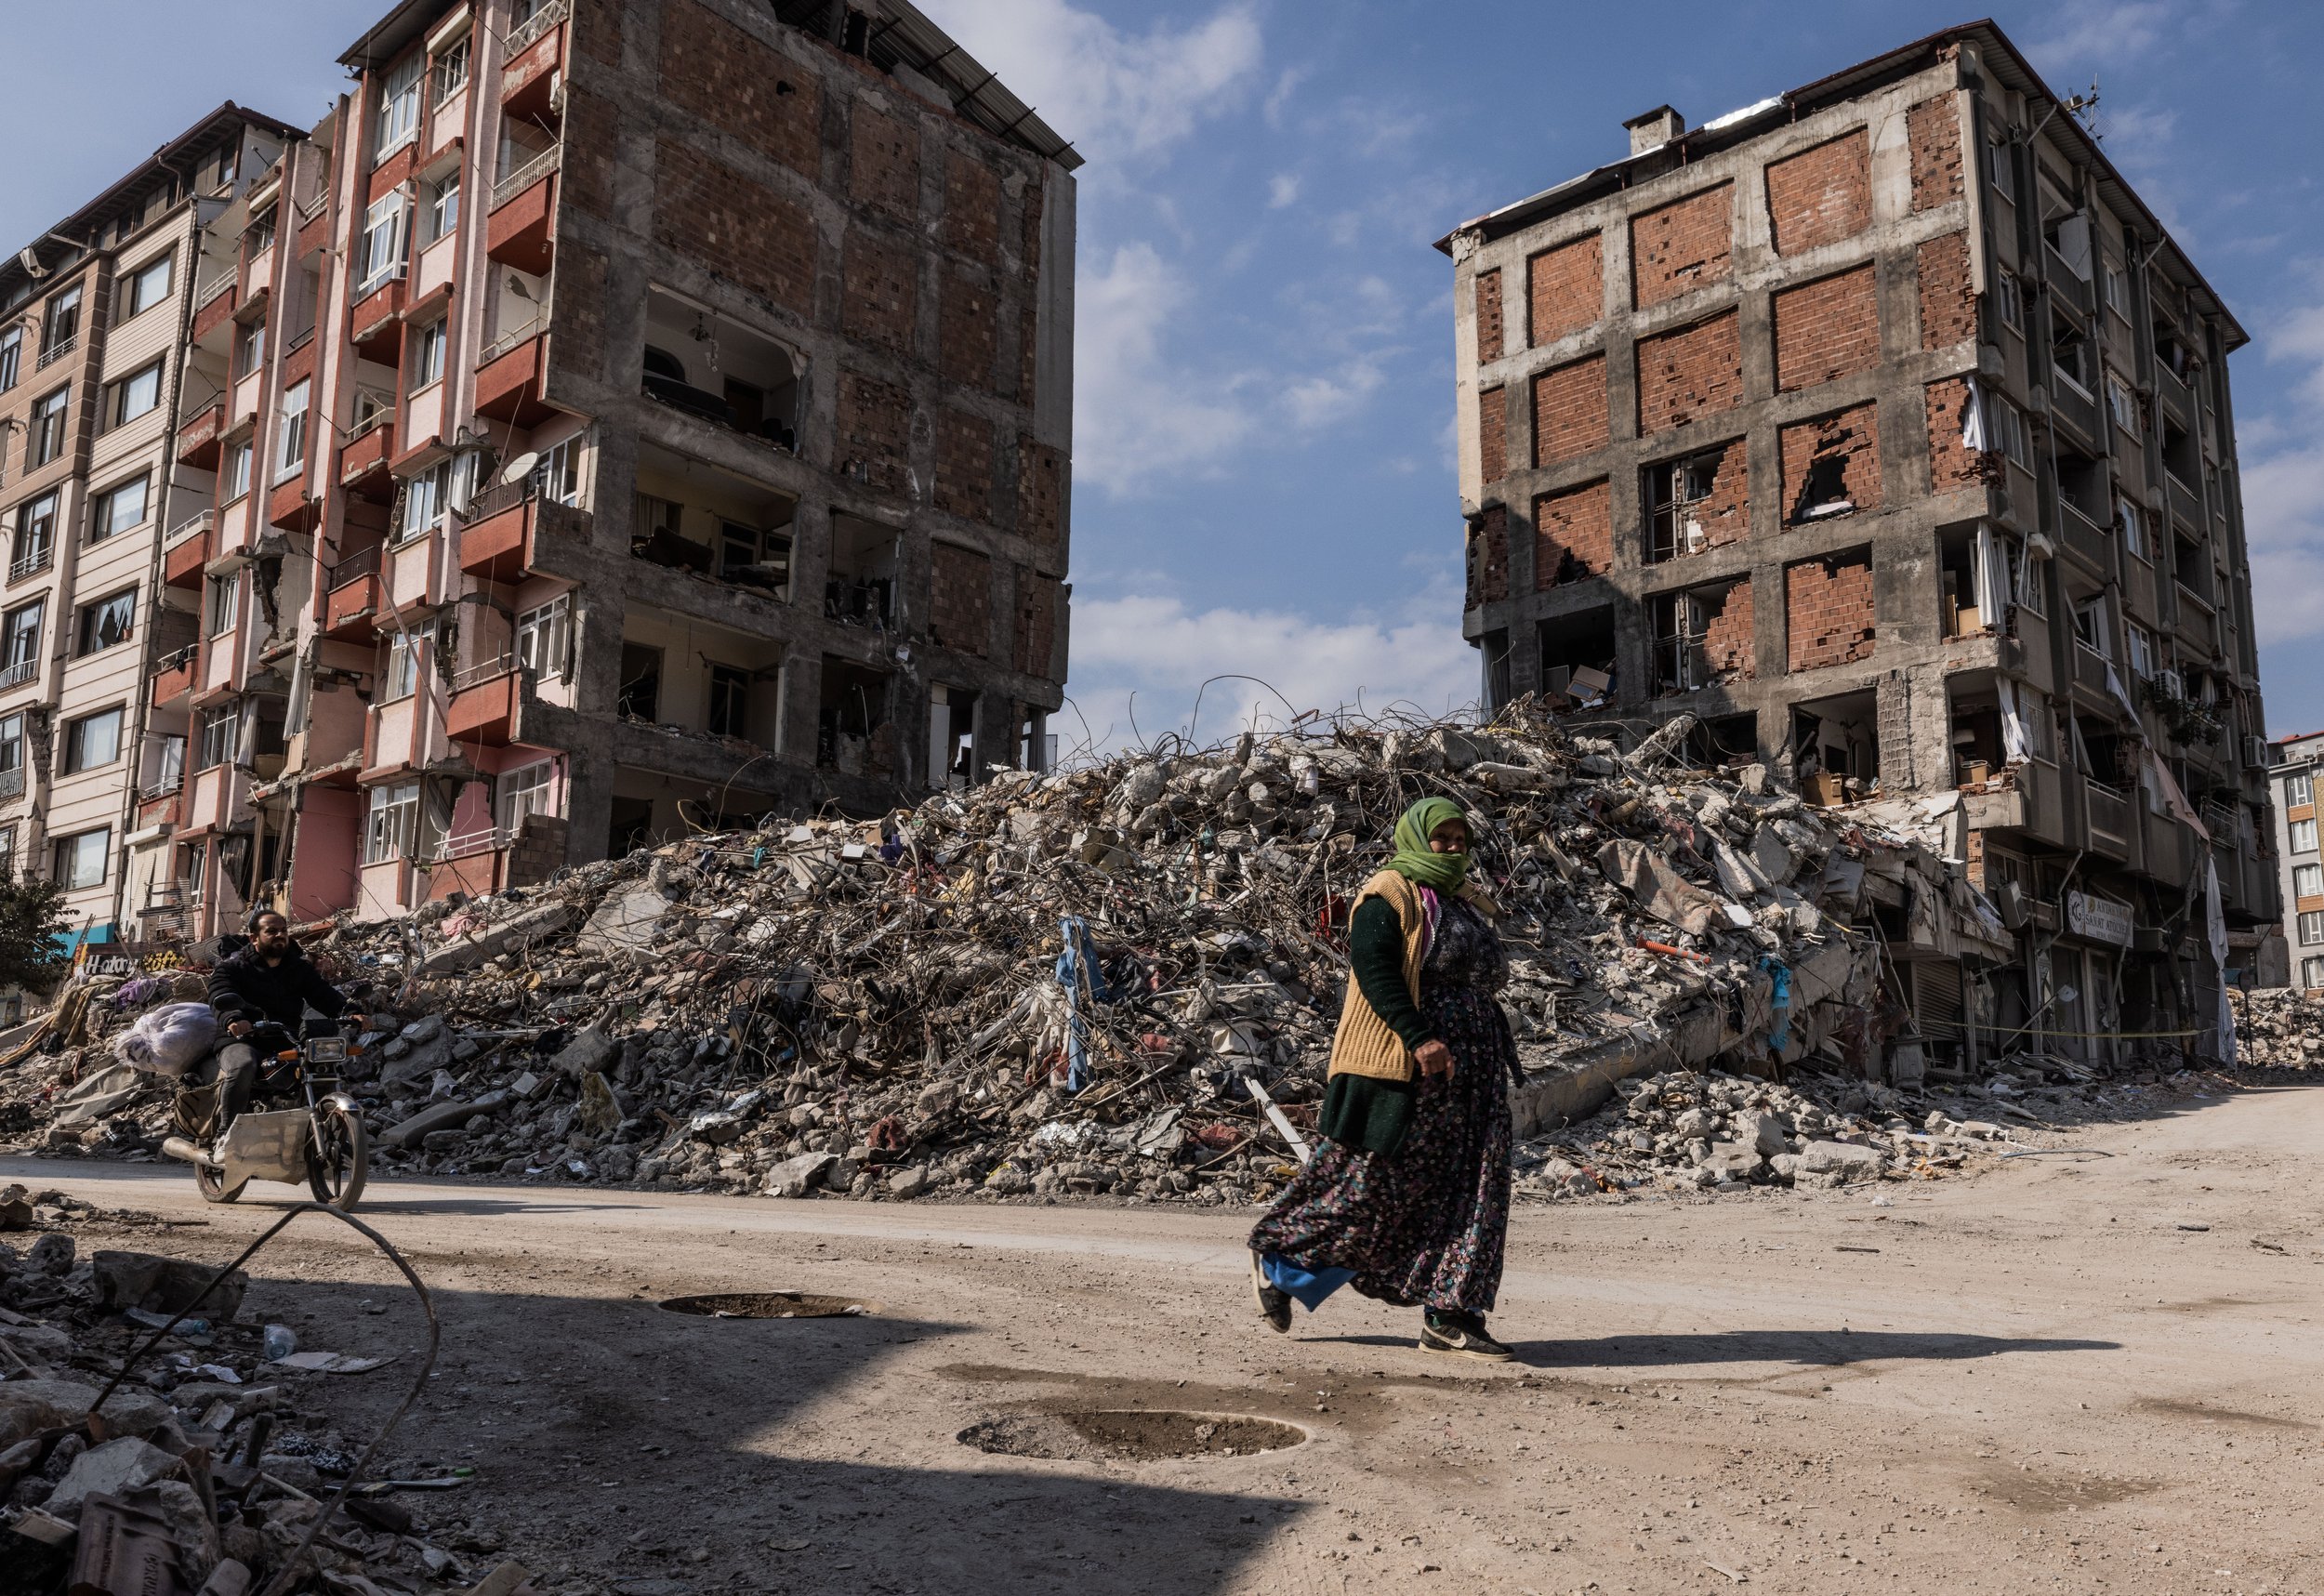  A Turkish woman walks through the rubble in the city center of Hatay, Turkey on February 24, 2023.  